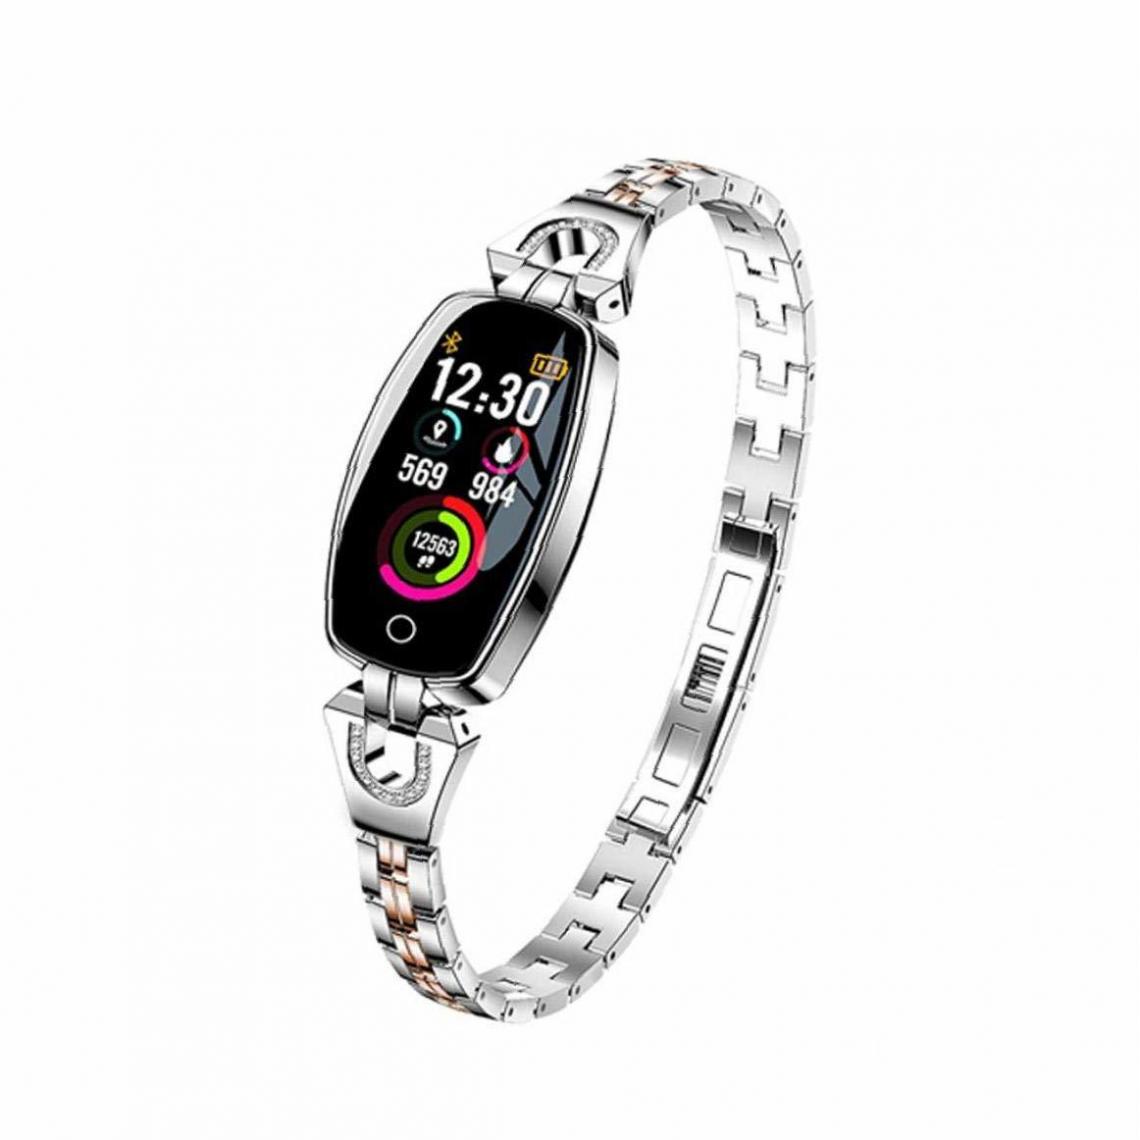 Chronotech Montres - Ladies Smart Watch H8 with Heart Rate Detection, Fitness Tracker, IP67 Waterproof (Silver) - Montre connectée